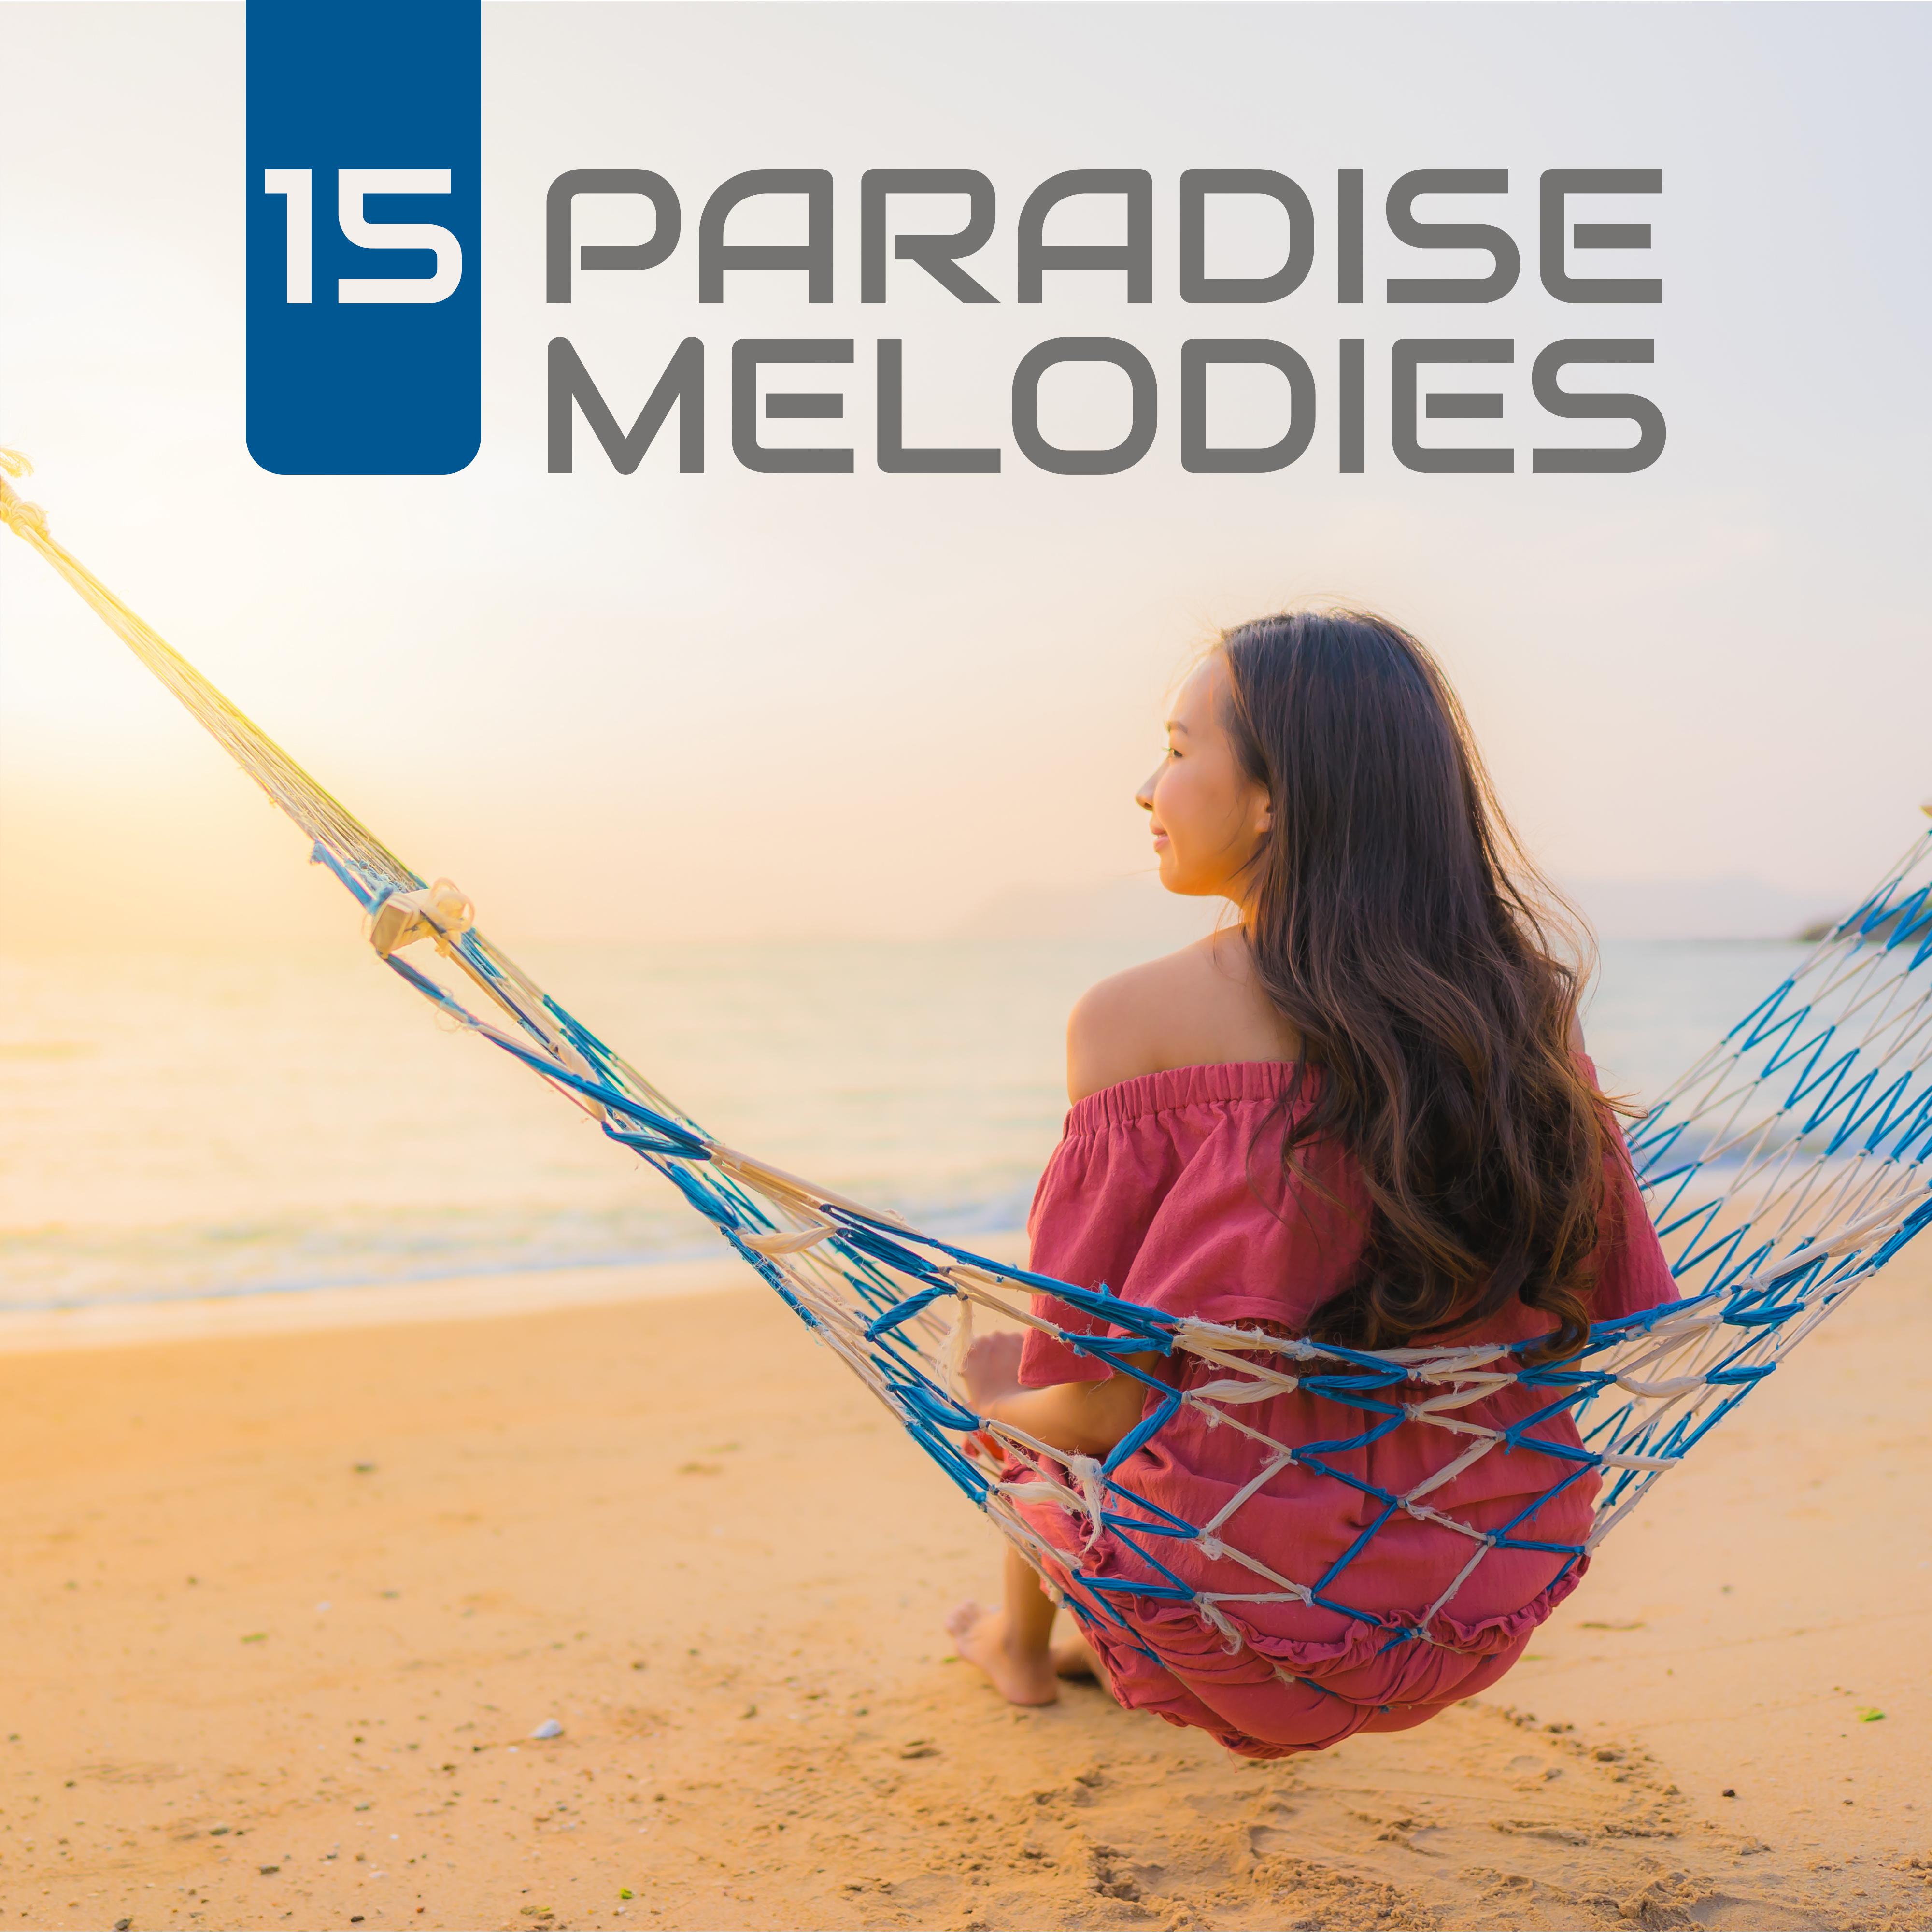 15 Paradise Melodies – Yoga Training, Meditation Music for Rest, Deep Relaxation, Inner Focus, Asian Relaxation Chillout, Yoga Music to Calm Down, Zen Vibrations